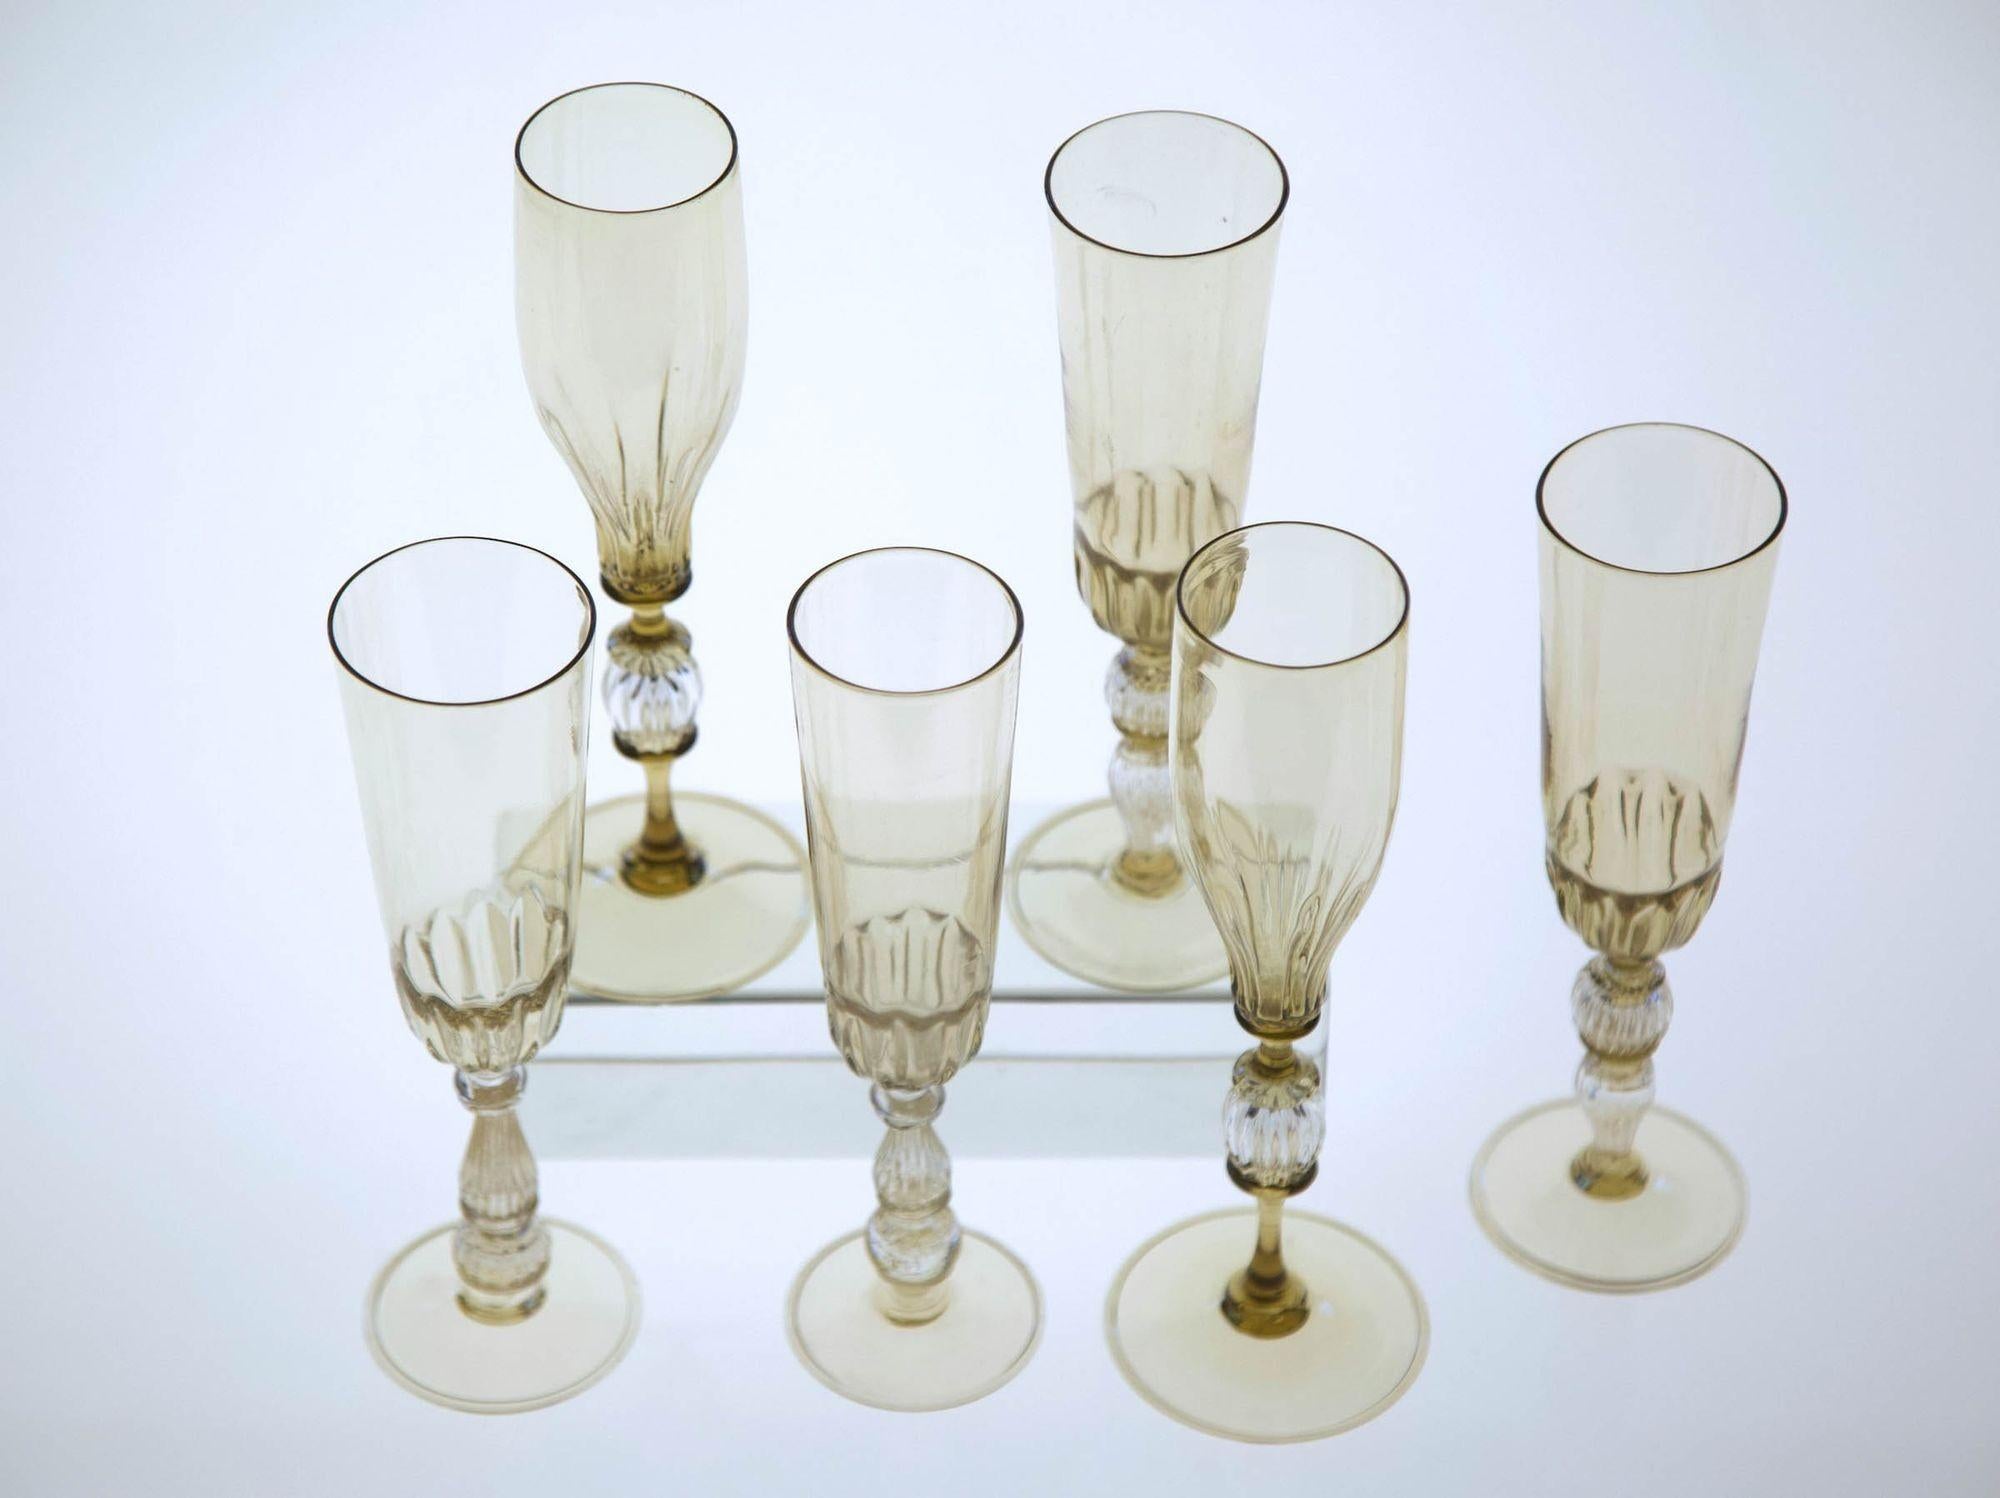 From the Cenedese personal collection. Here a set of 6 stem glass made in 3 different designs.
All in light fume.
This group is absolutely unique and would become the focus of a table set or make three set pairs of flute. There is a special